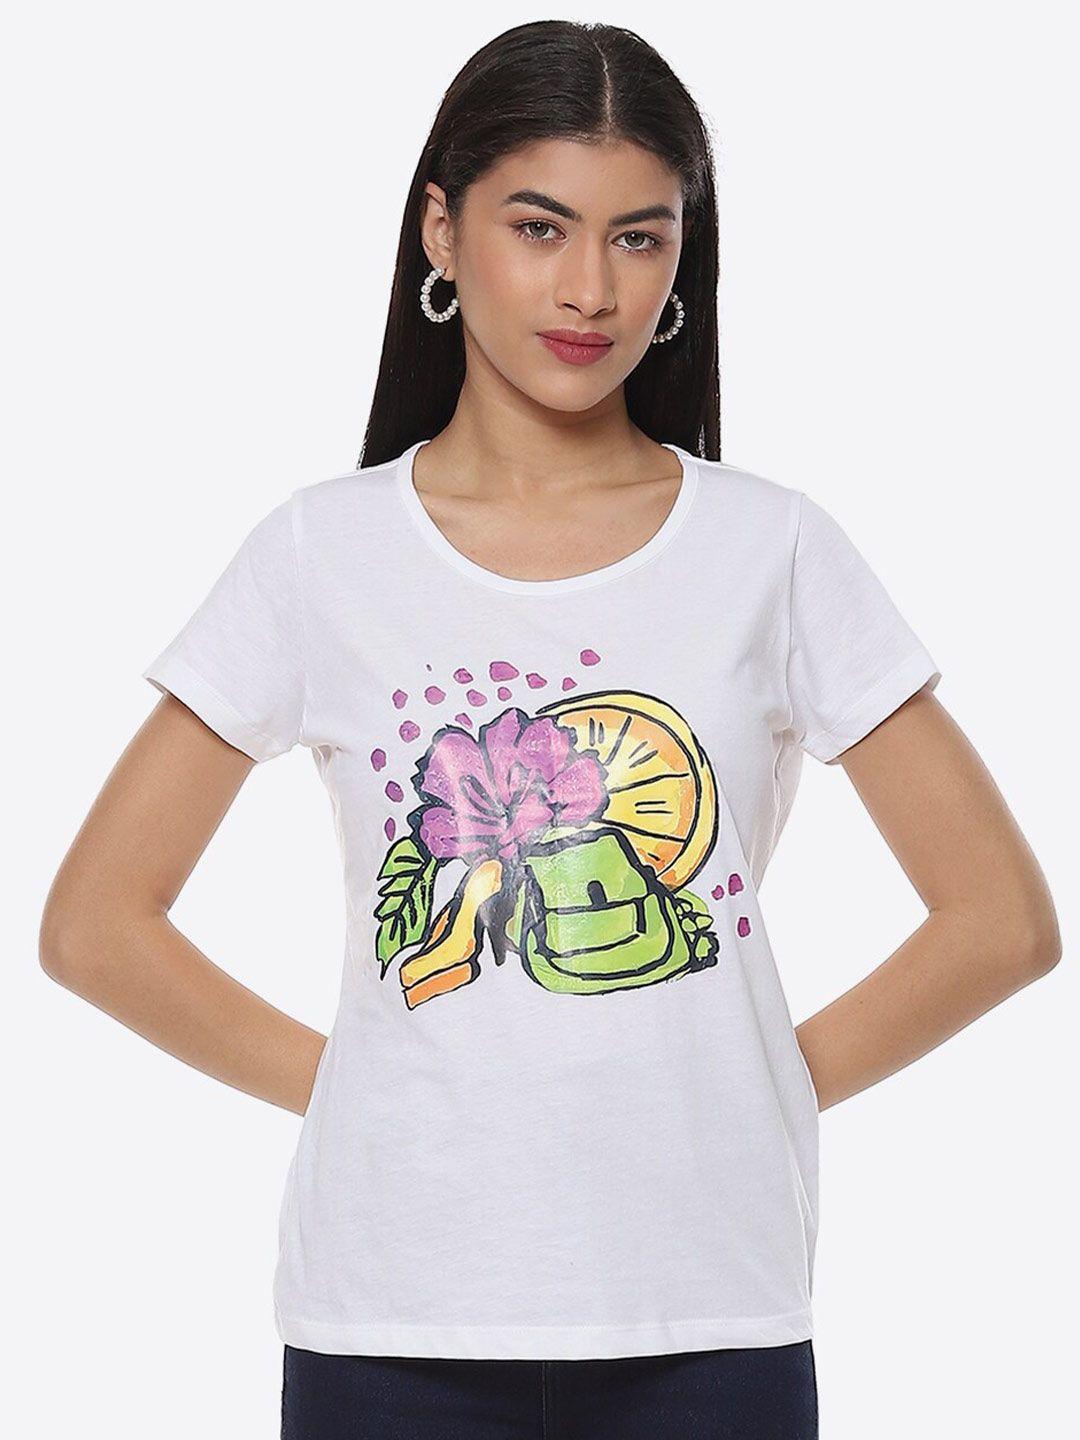 2bme graphic printed short sleeves cotton t-shirt